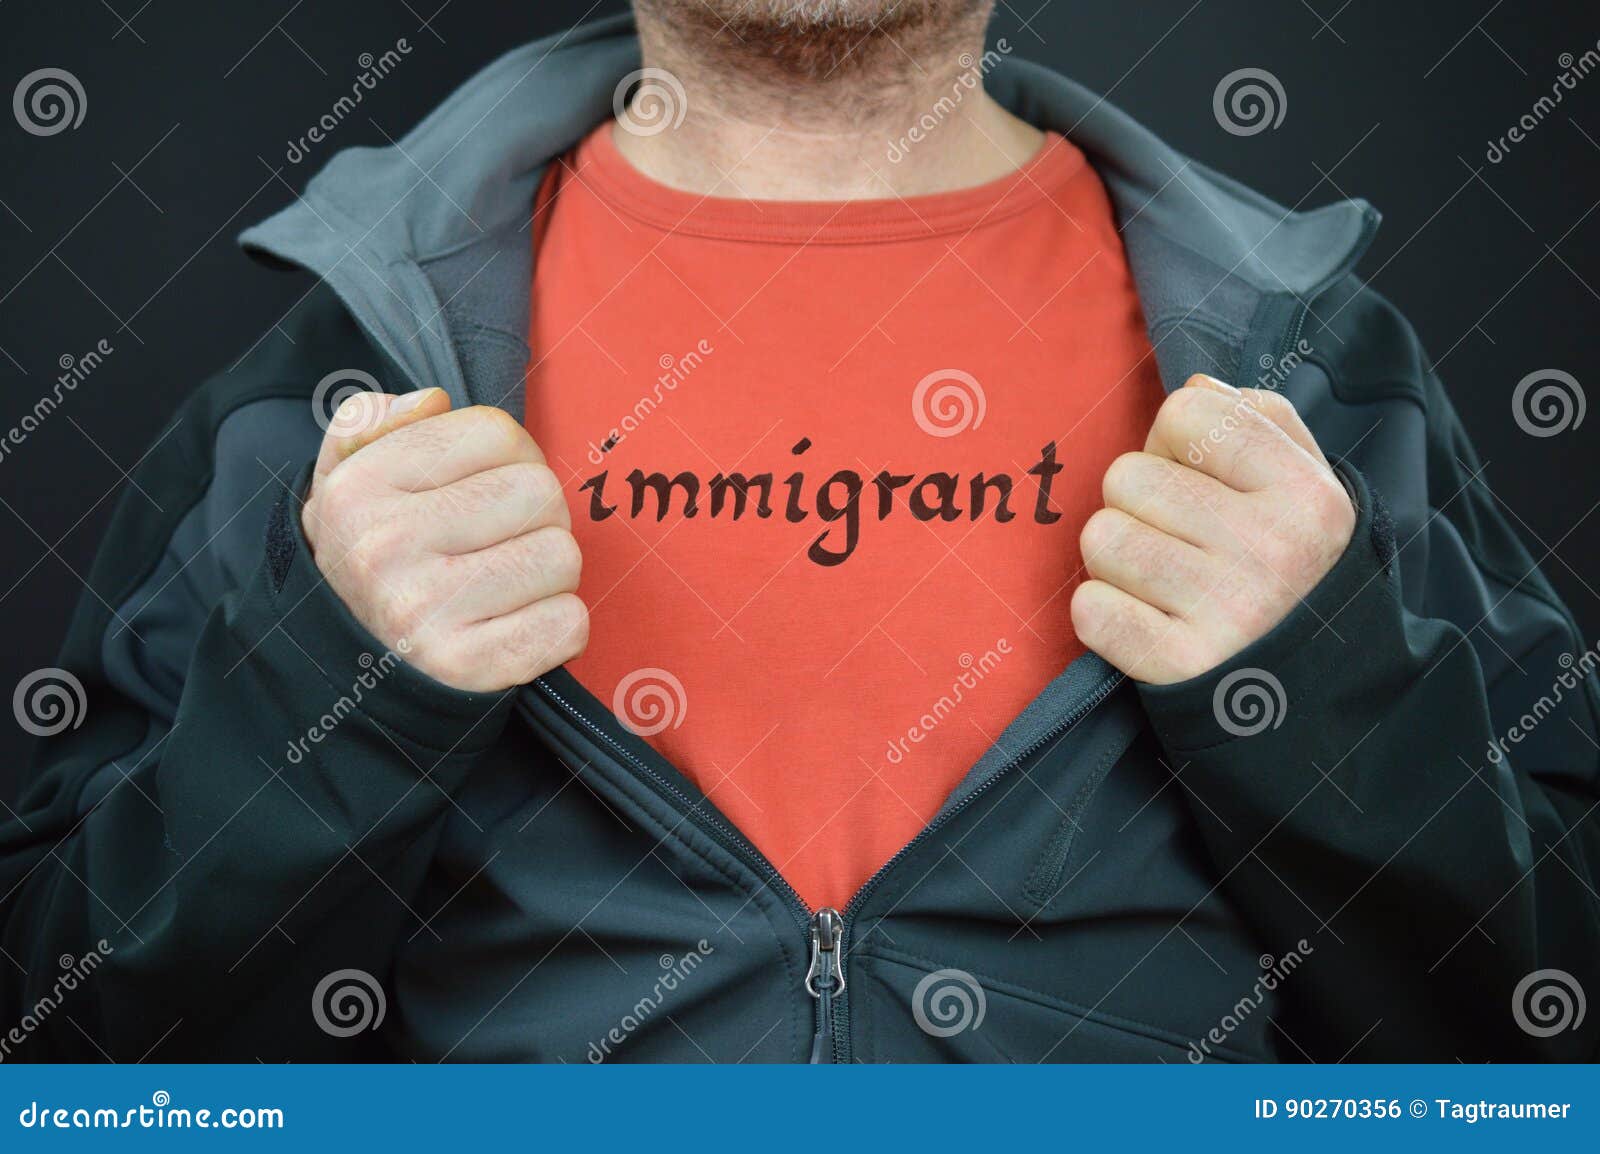 man with t-shirt and the word immigrant on it